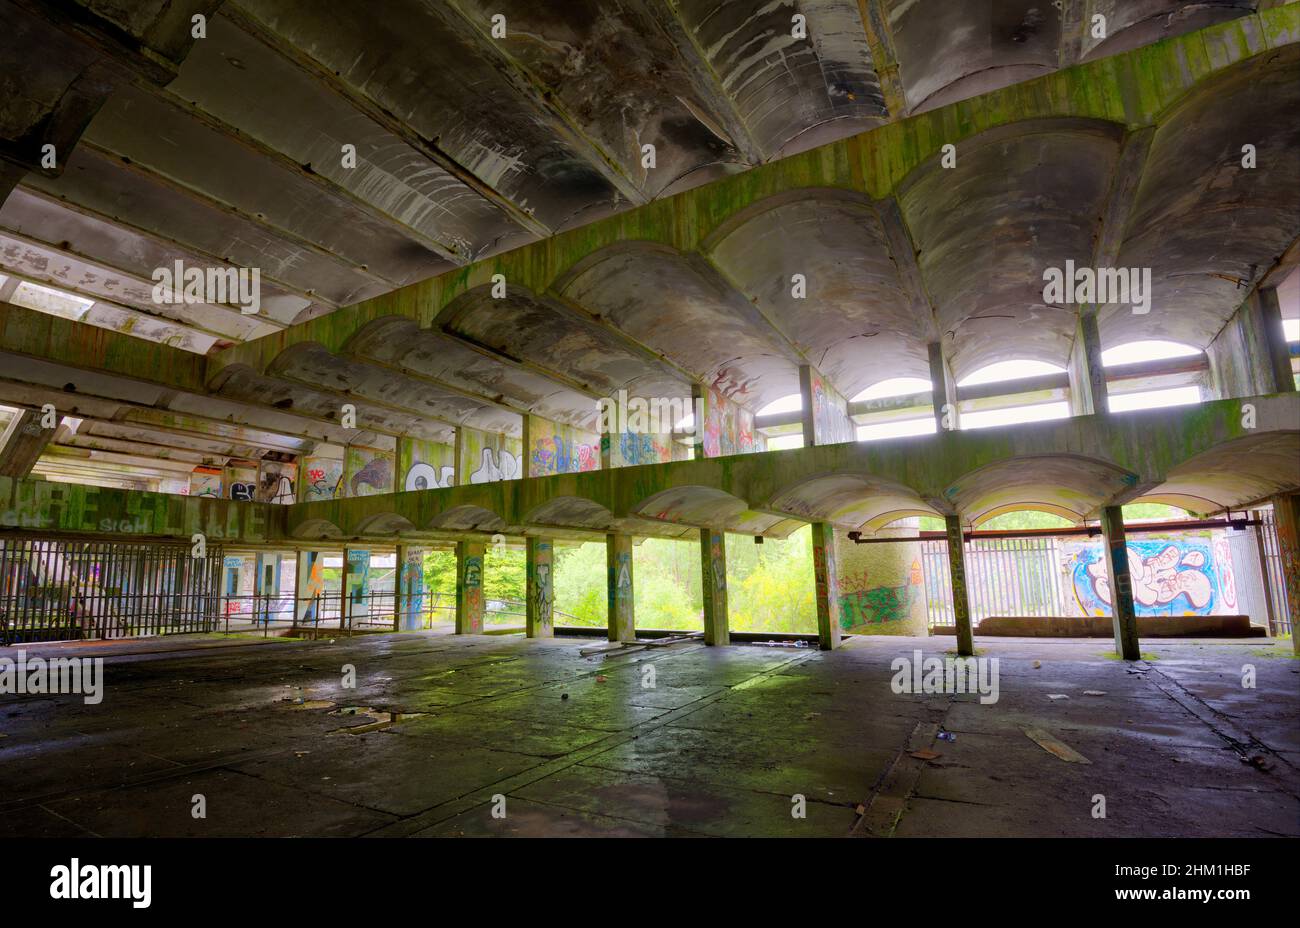 Derelict A listed brutalist style building and former priest's training centre, St Peter's Seminary in Cardross, Argyll and Bute, Scotland Stock Photo